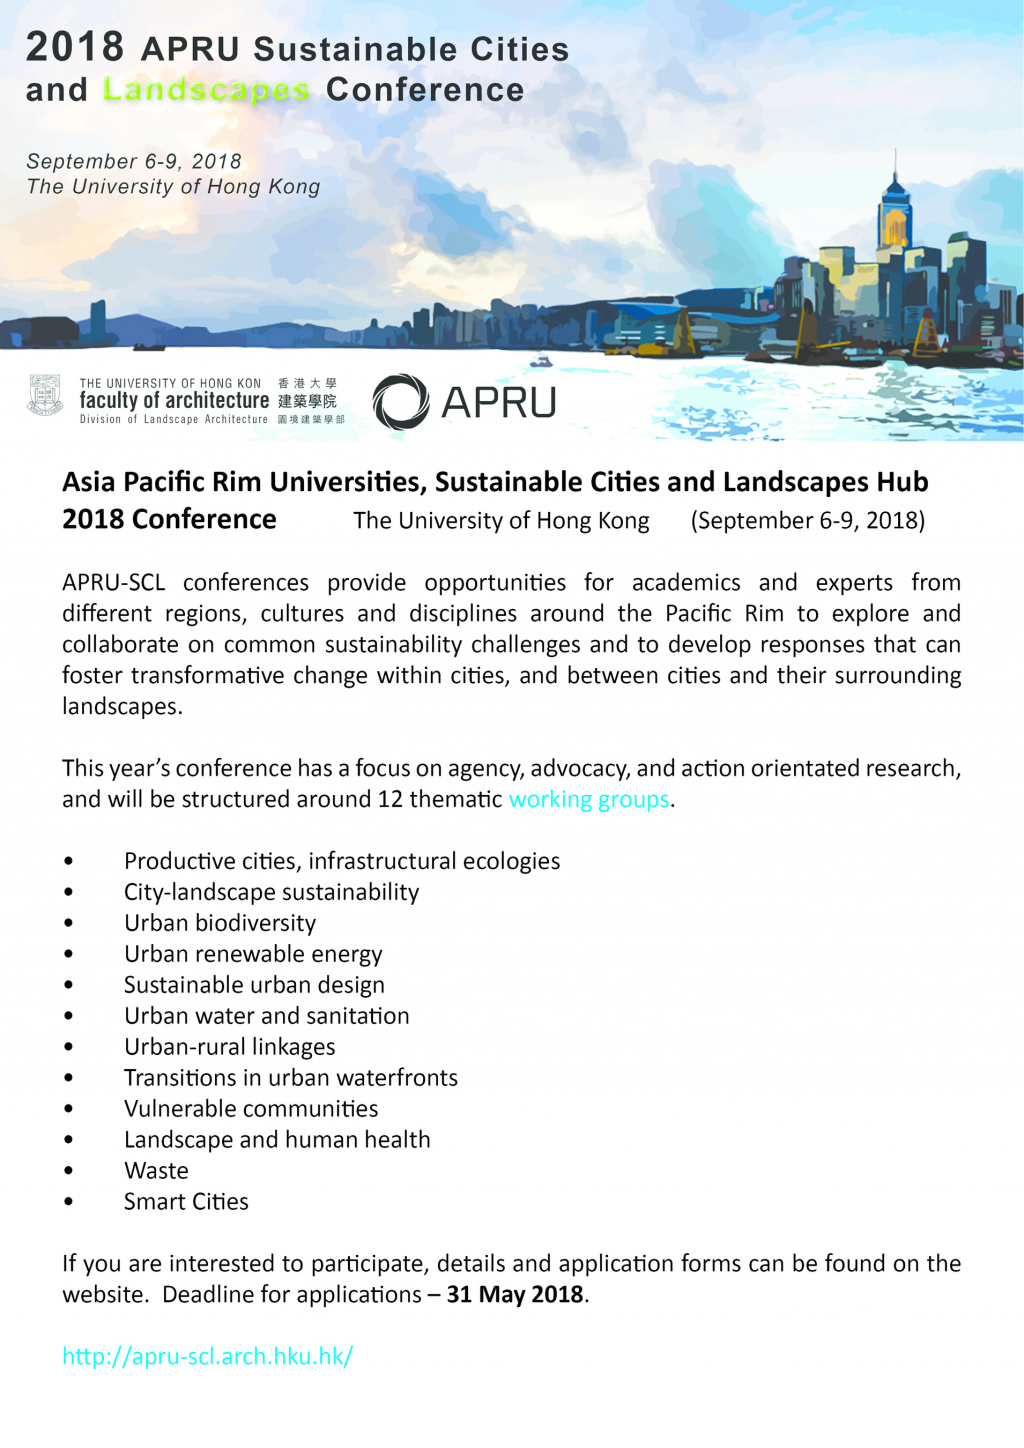 Asia Pacific Rim Universities, Sustainable Cities and Landscapes Hub 2018 Conference